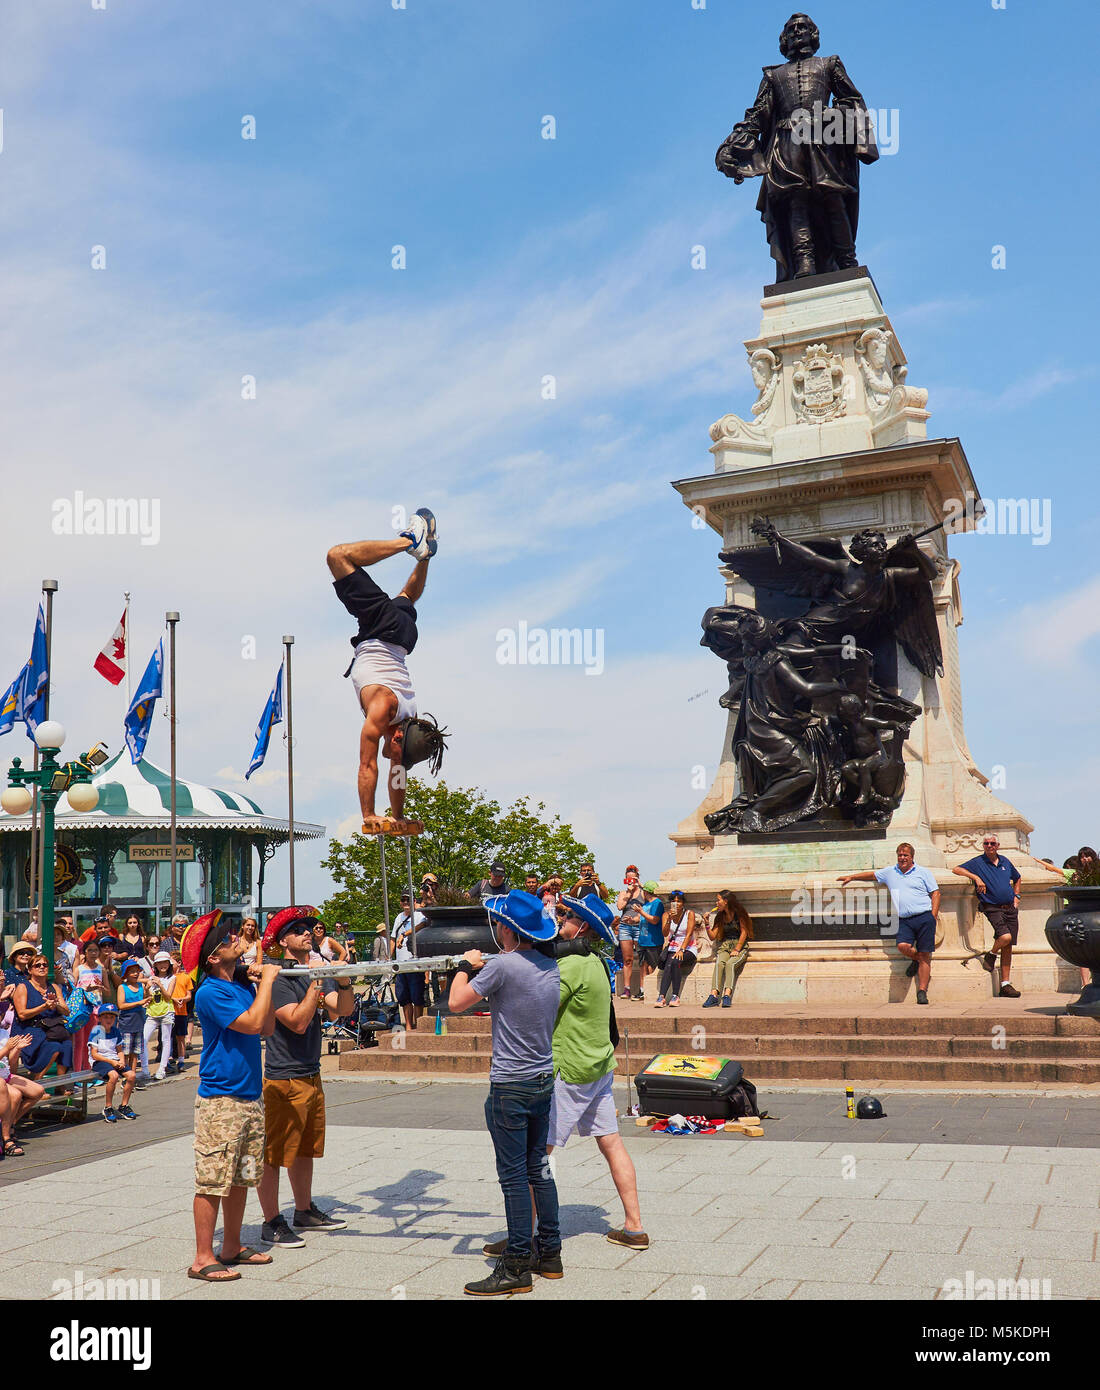 Street performer balancing on his hands and statue of Samuel de Champlain, Terrasse Dufferin (1879), Quebec City, Quebec Province, Canada. Stock Photo